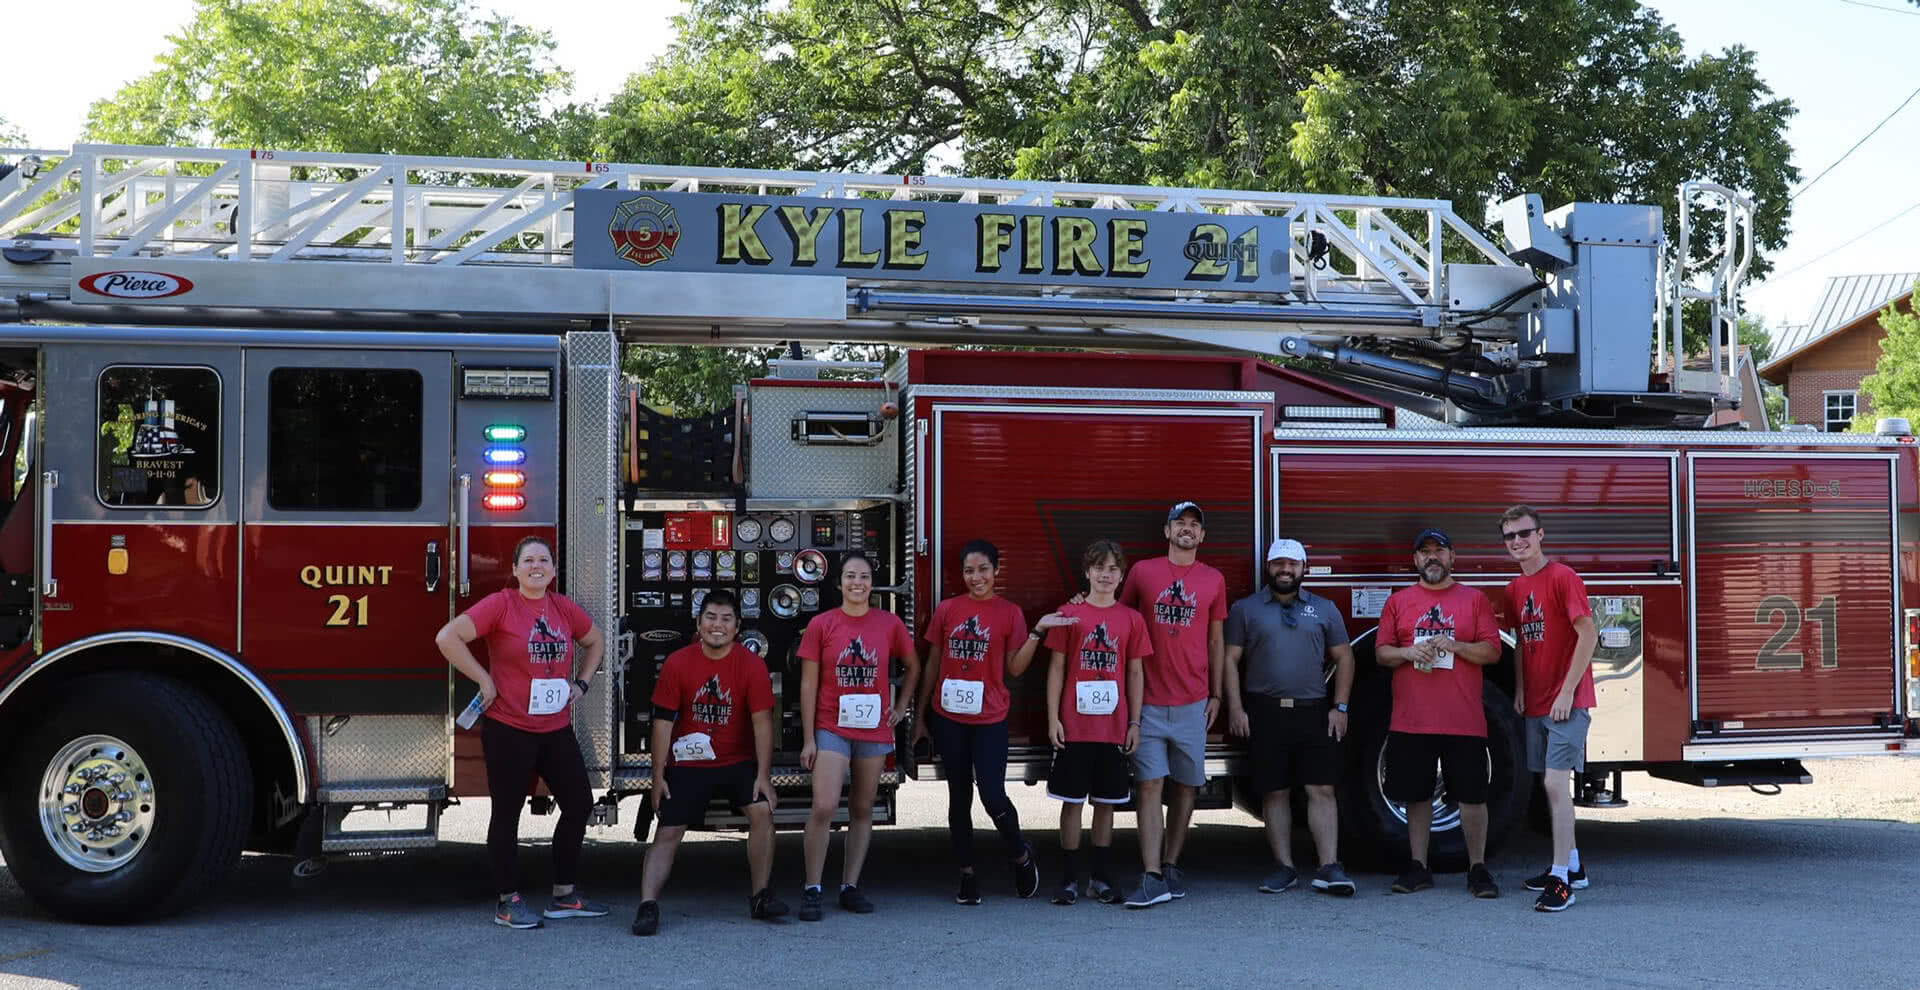 Kyle Fire Truck at the station